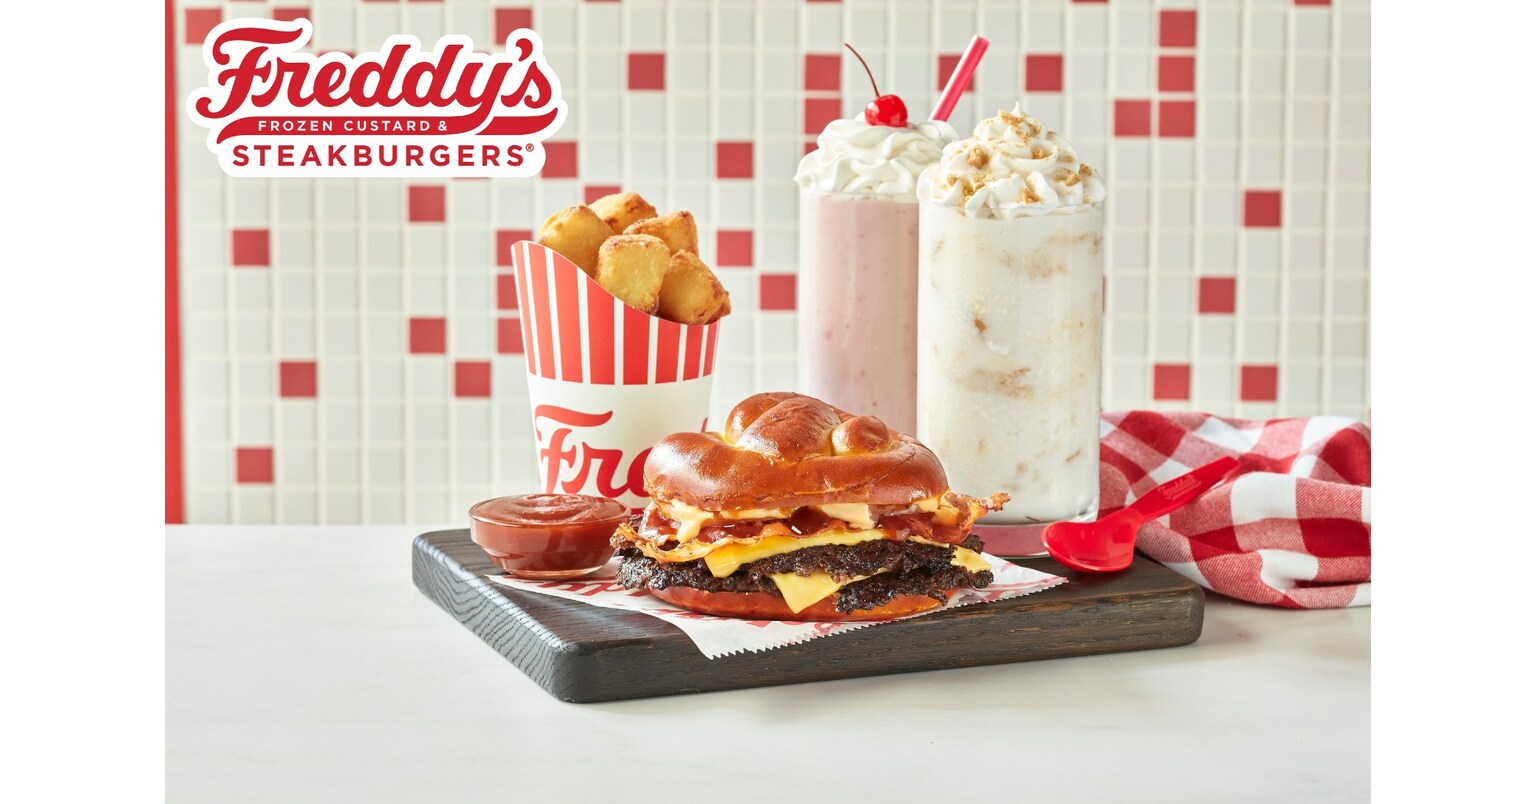 Freddy's introduces its new Steakburger Stacker and Reese's® Creamy Peanut  Butter Shake & Reese's® Crunchy Peanut Butter Concrete for a limited time